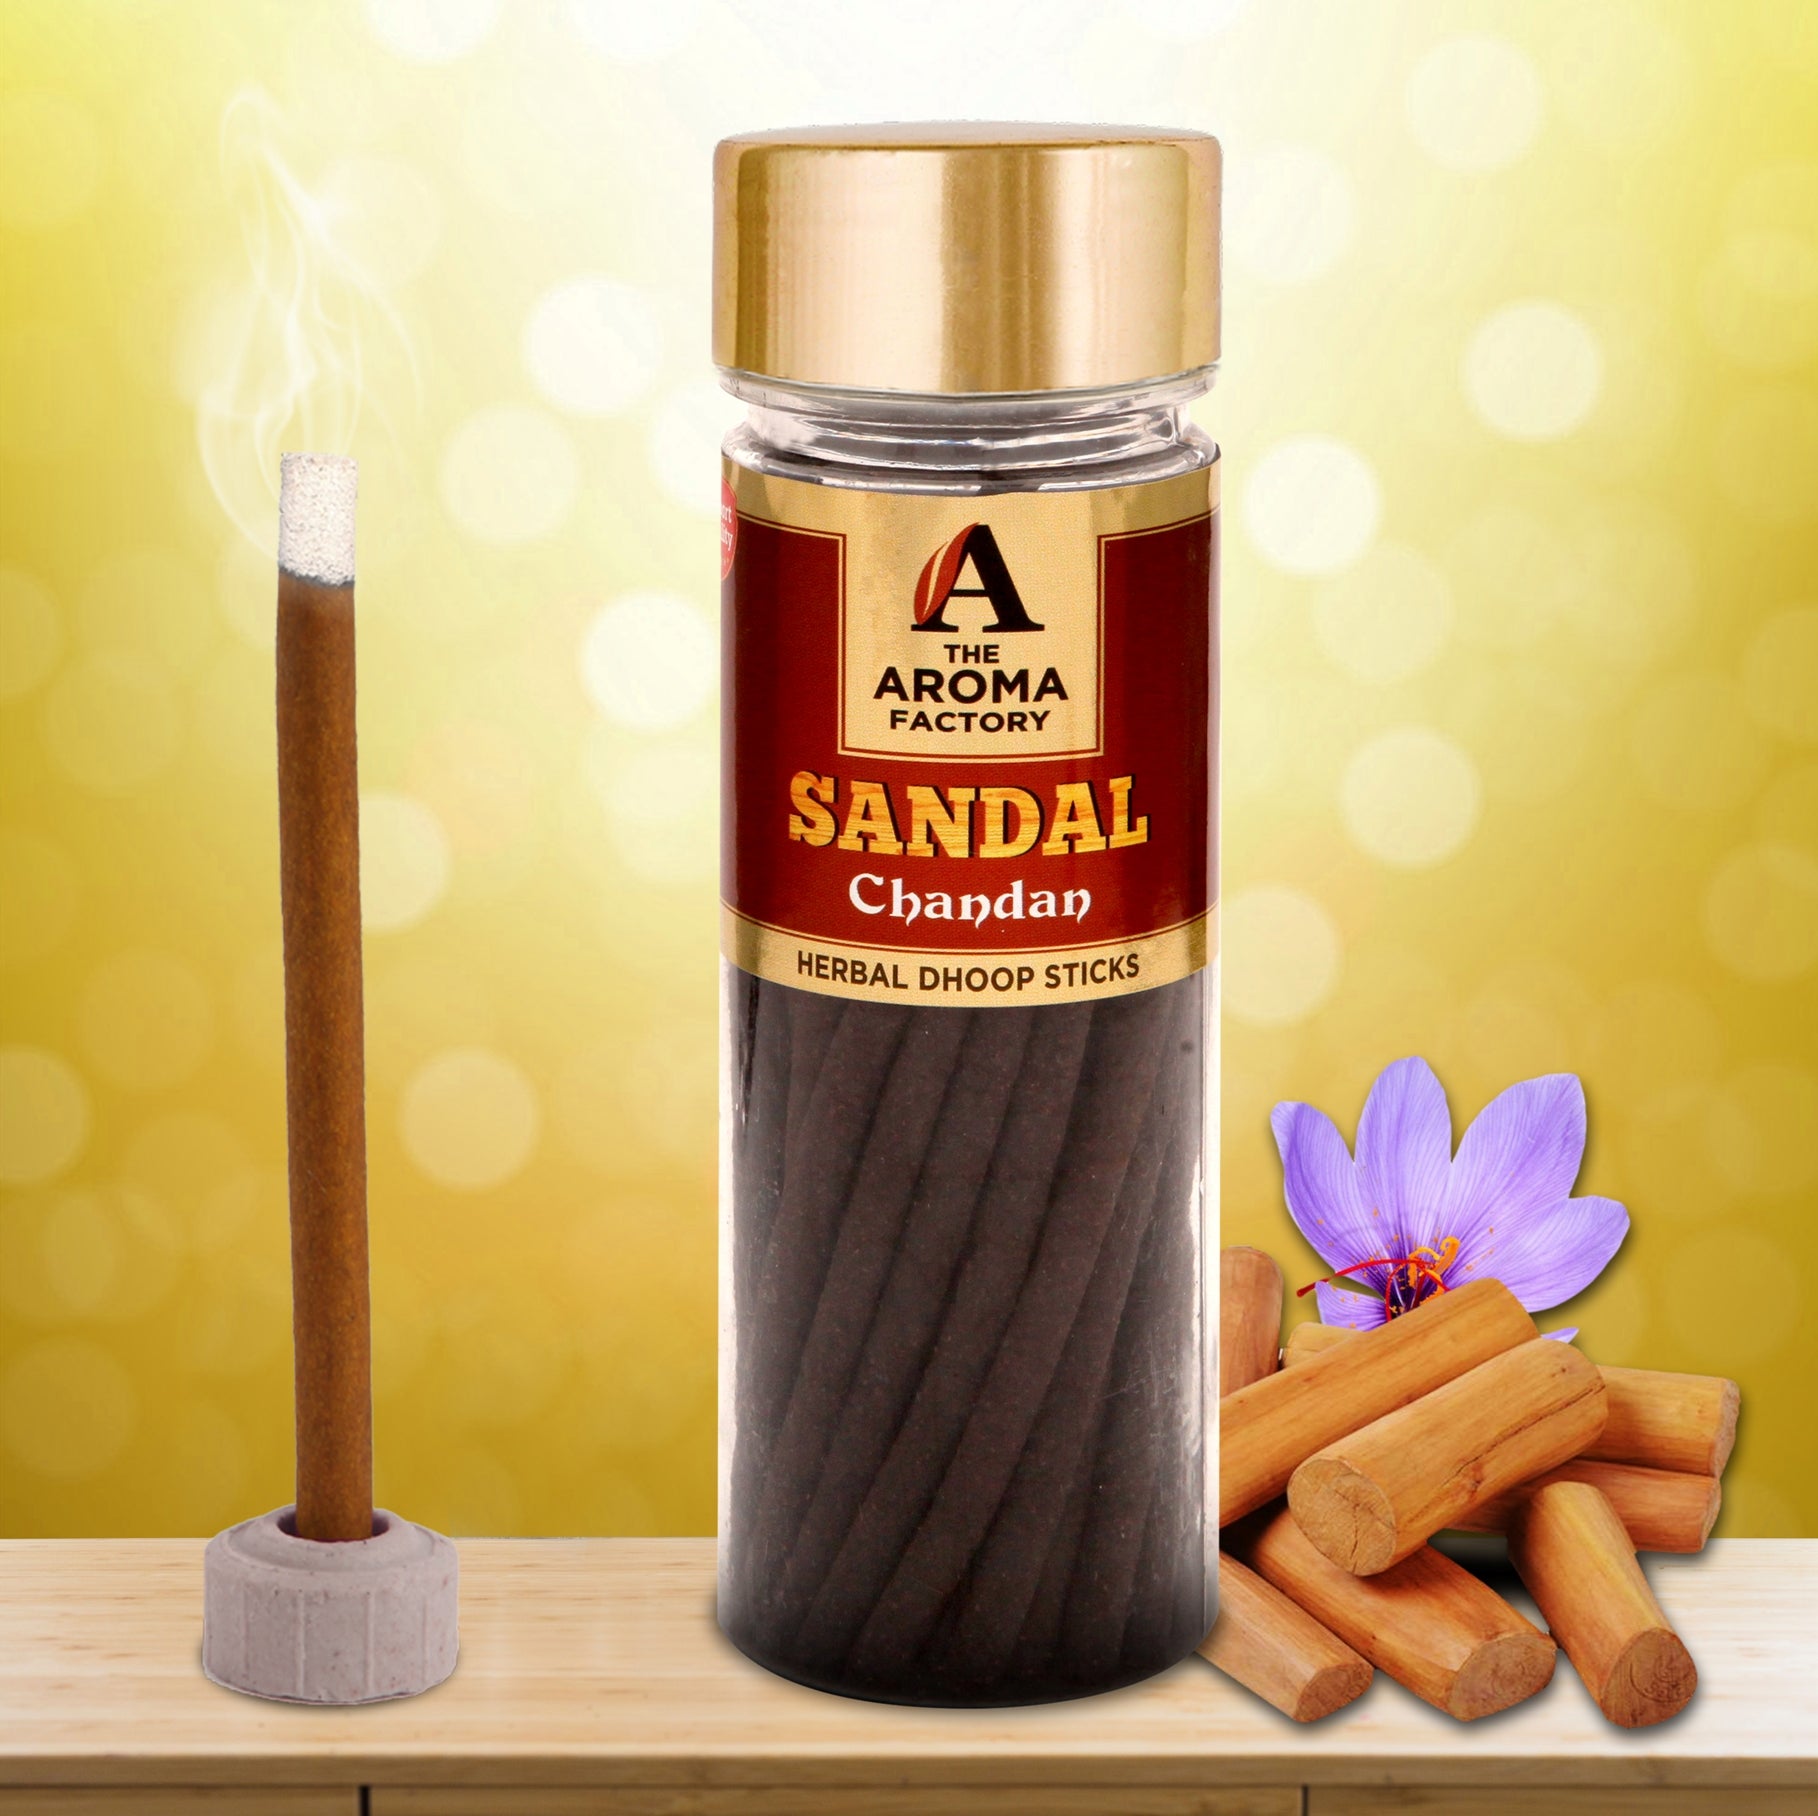 The Aroma Factory Chandan Sandal Dhoop Sticks Bottle [Free Stand] 100g